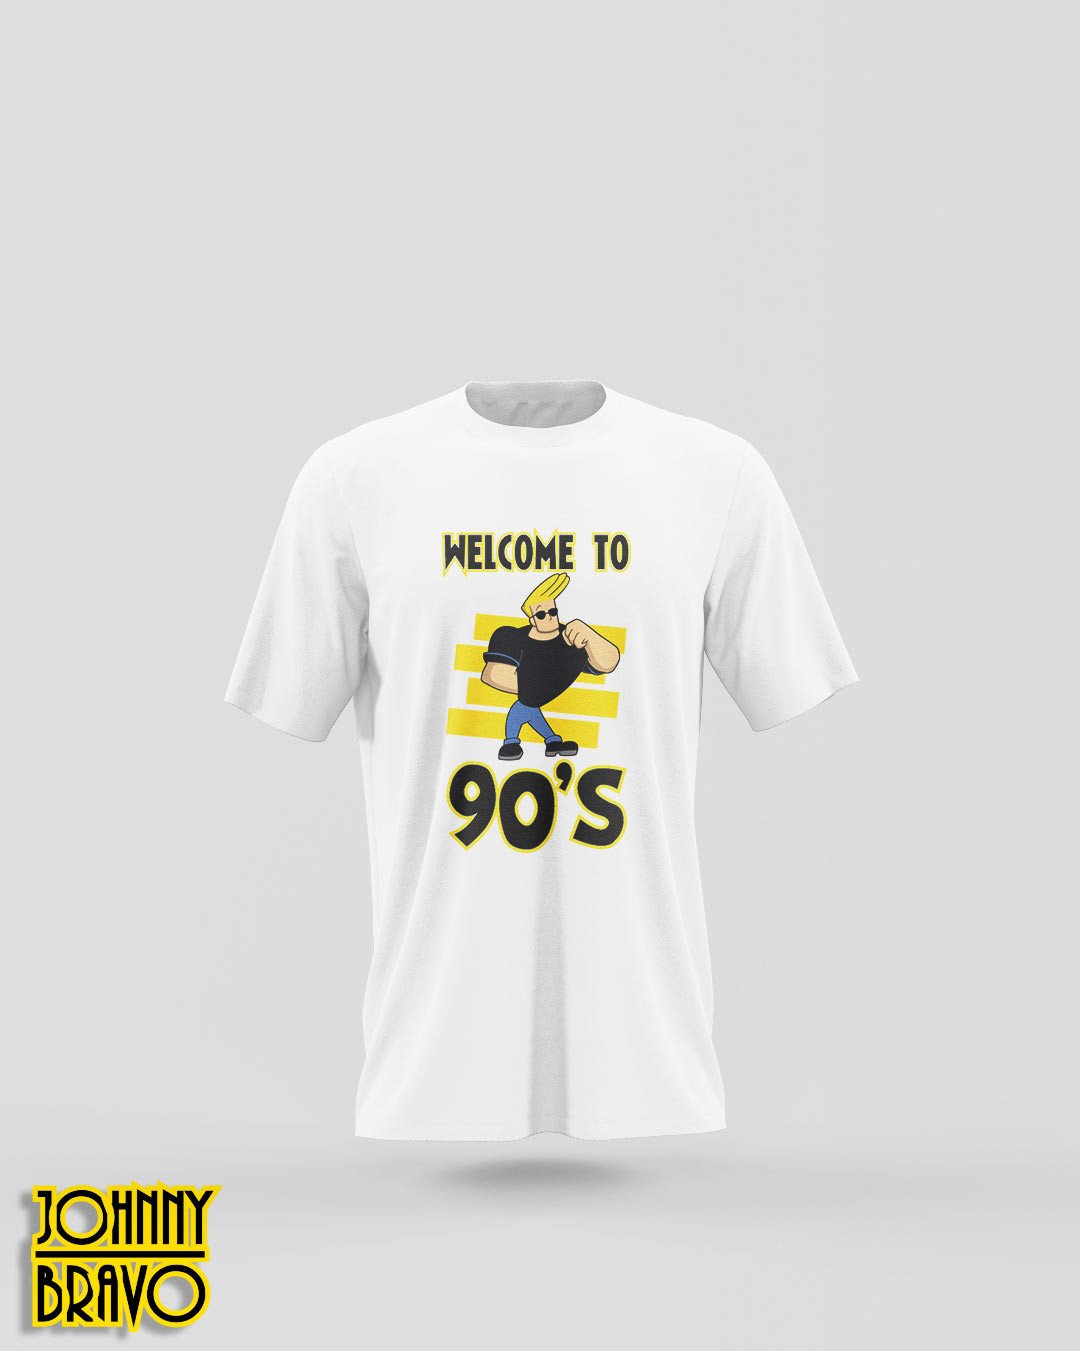 Johnny Bravo – Welcome to 90’s Printed T-Shirts